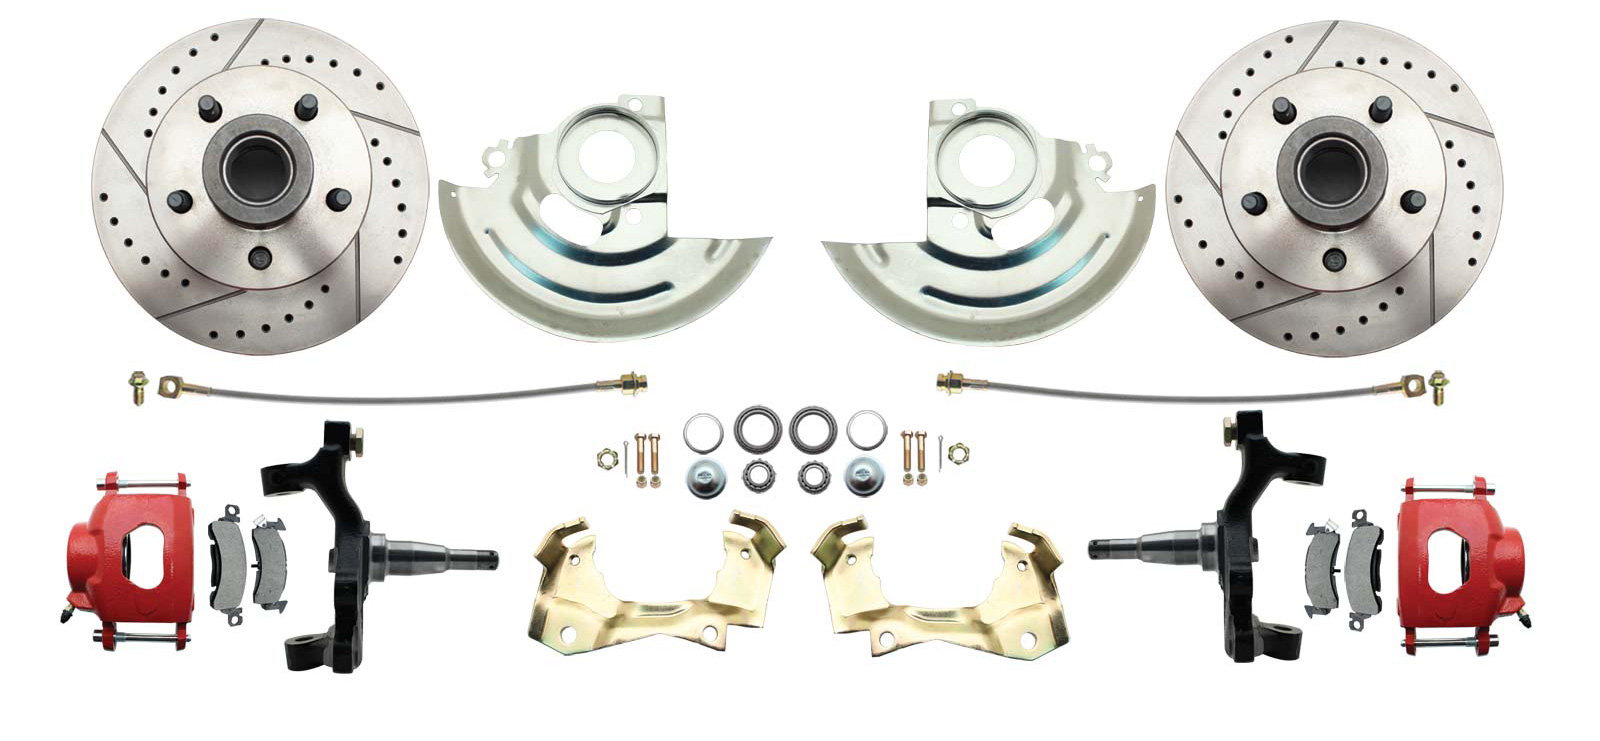 1964-1972 GM A Body (Chevelle, GTO, Cutlass) 2 Drop Front Disc Brake Kit W/ Drilled & Slotted Rotors Red Calipers